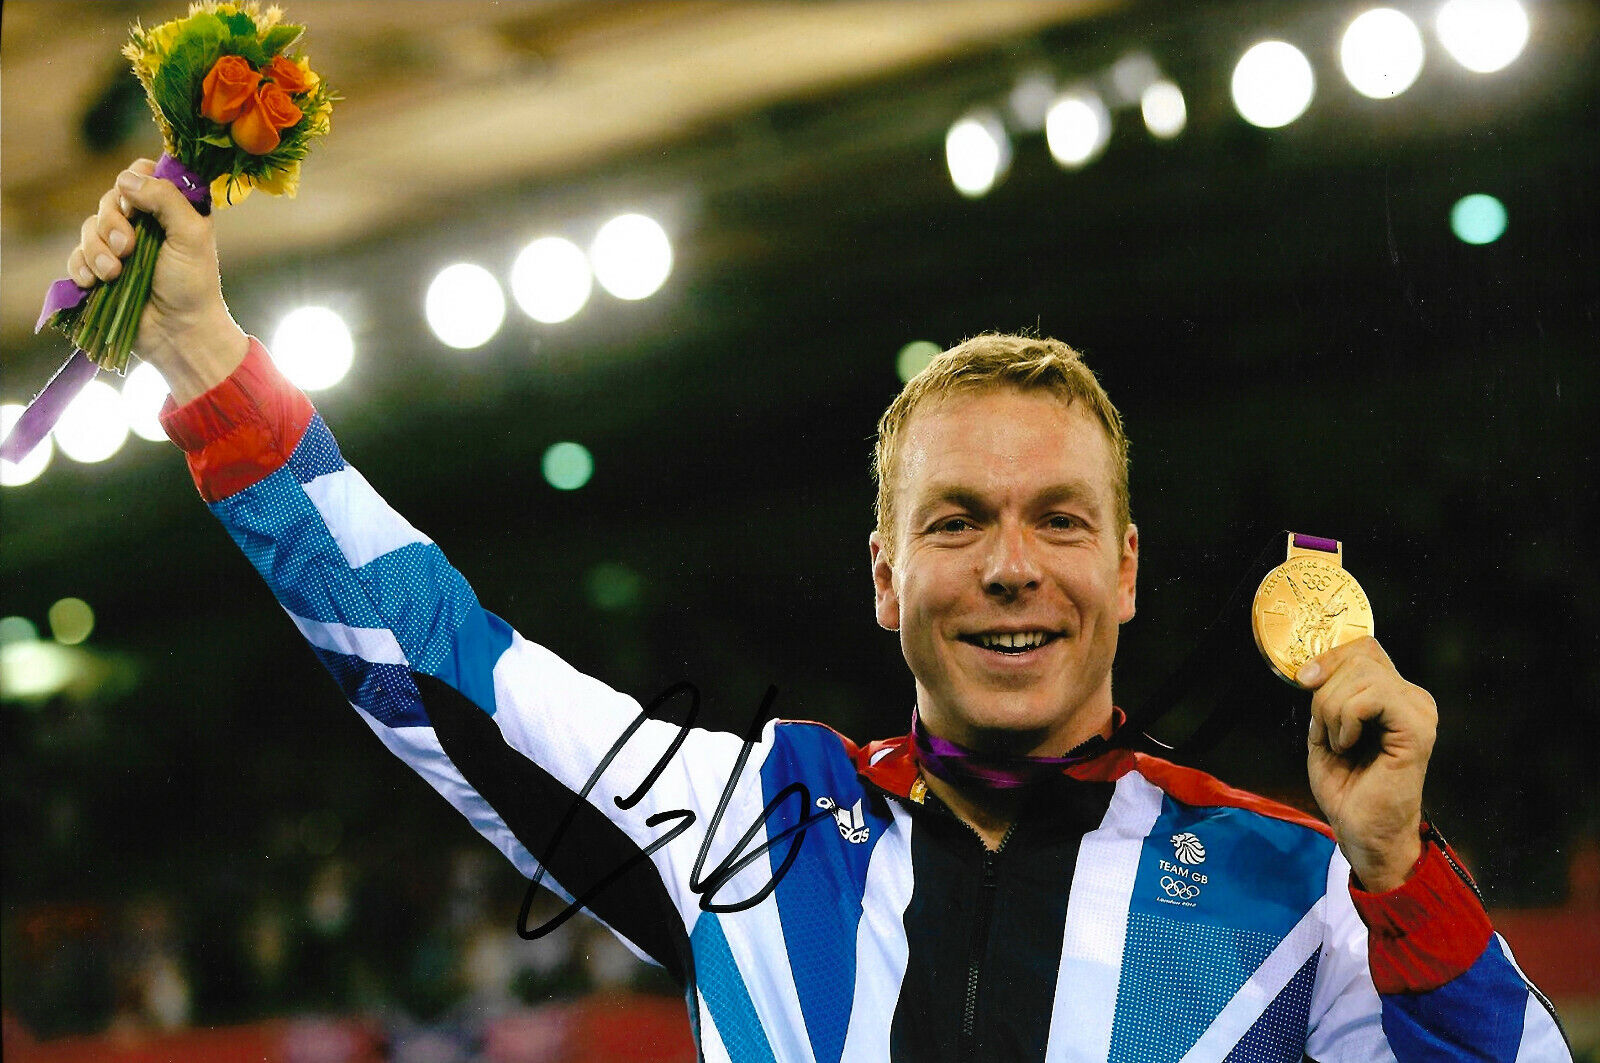 Chris Hoy signed 8x12 inch Photo Poster painting autograph